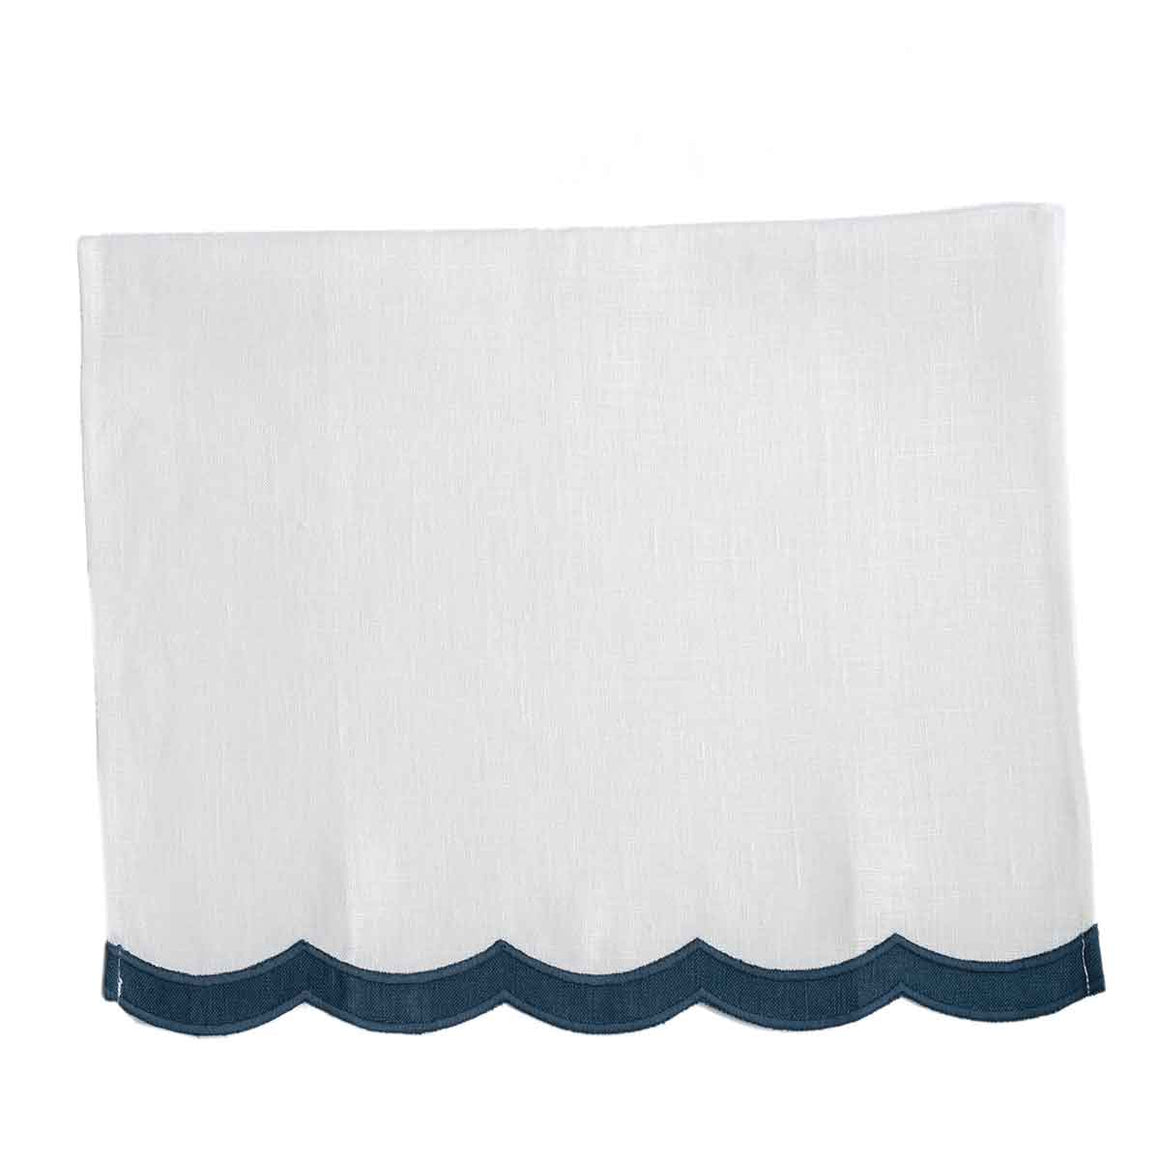 Traditions Guest Towel— 4-Bee Motif on 100% Cotton Terry - Emissary Fine  Linens